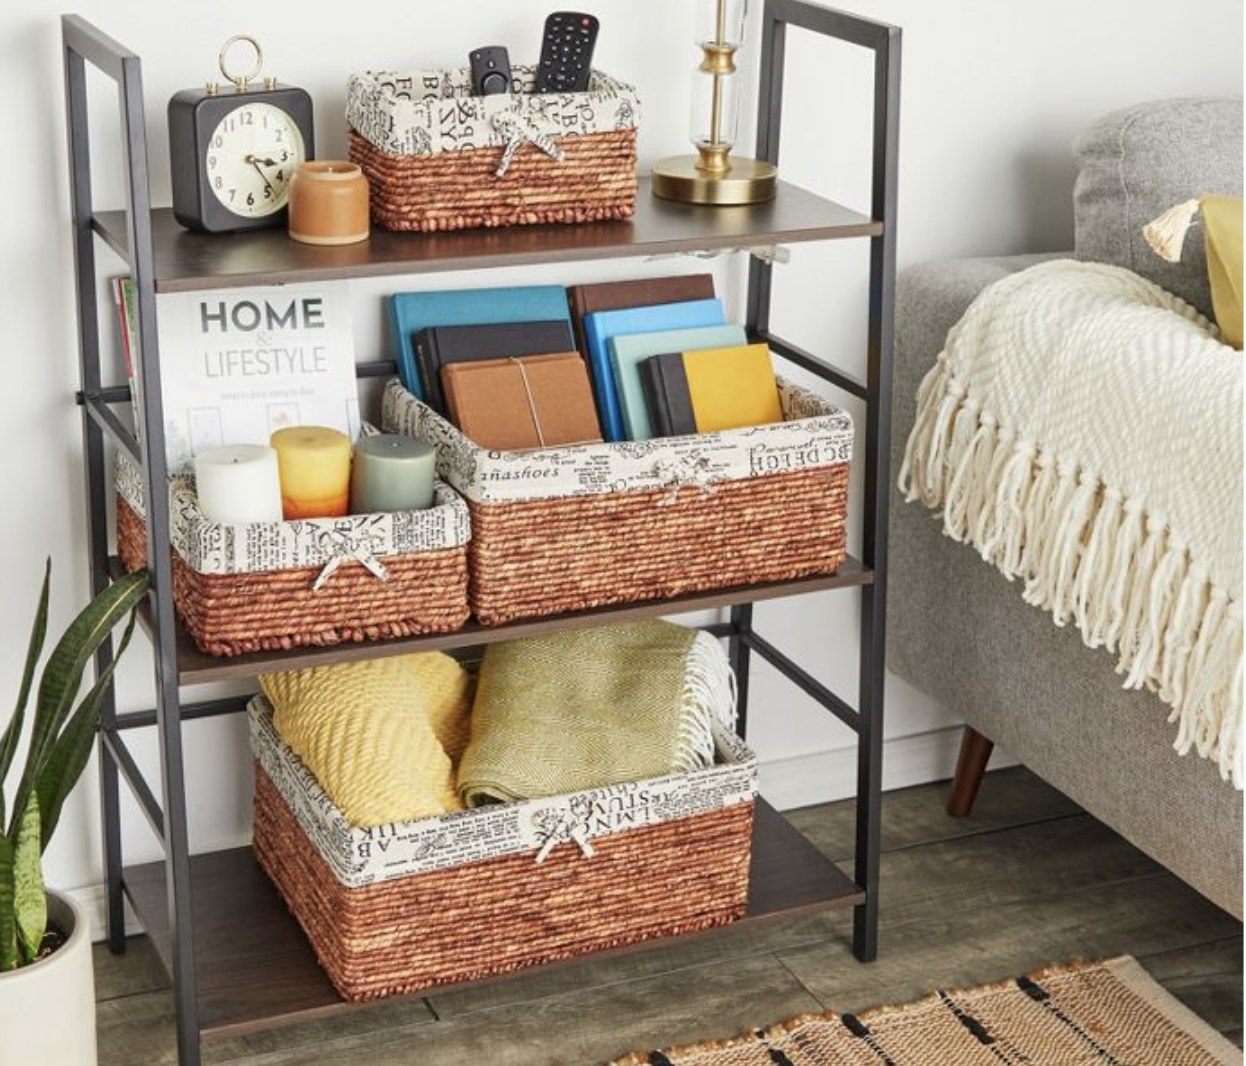 The storage baskets with items inside on shelves.